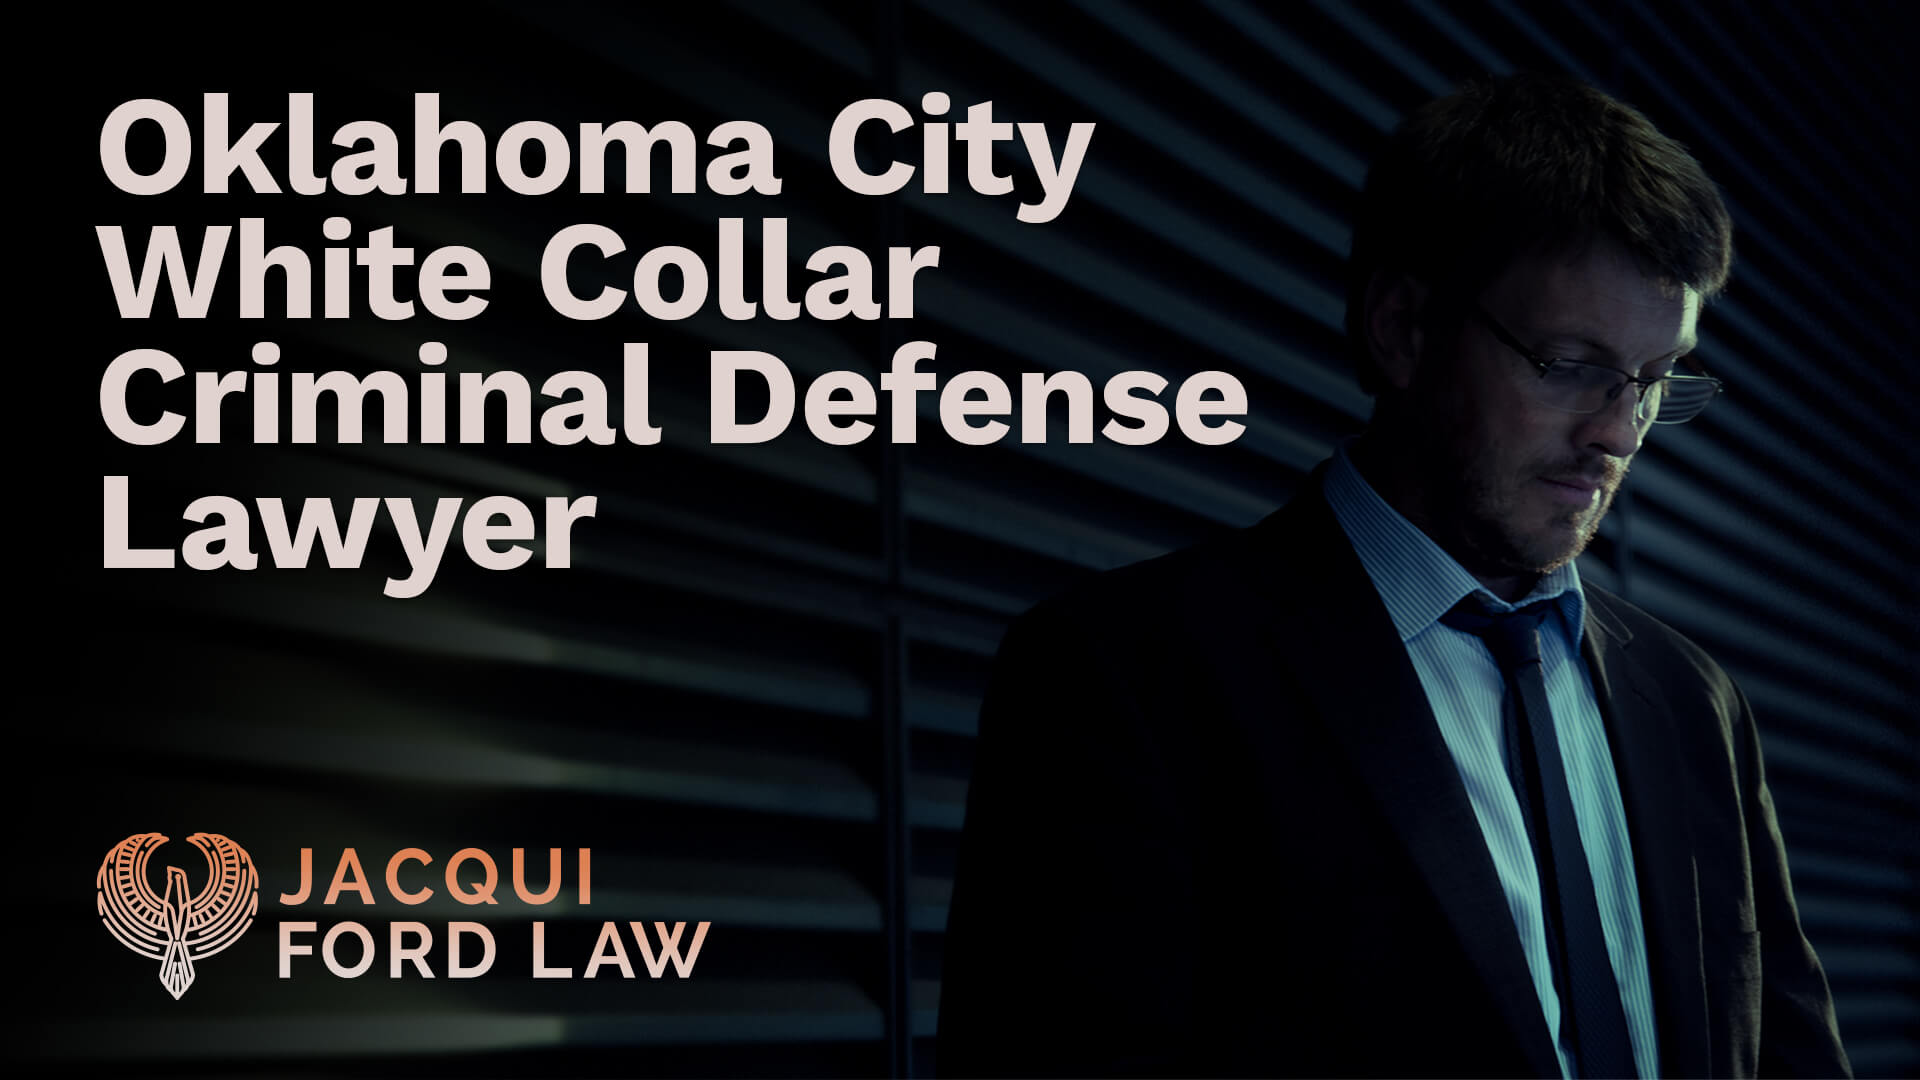 White-Collar-Crime-Jacqui-Ford-Law-Criminal-Defense-Lawyer-Oklahoma-City-Feat-PP